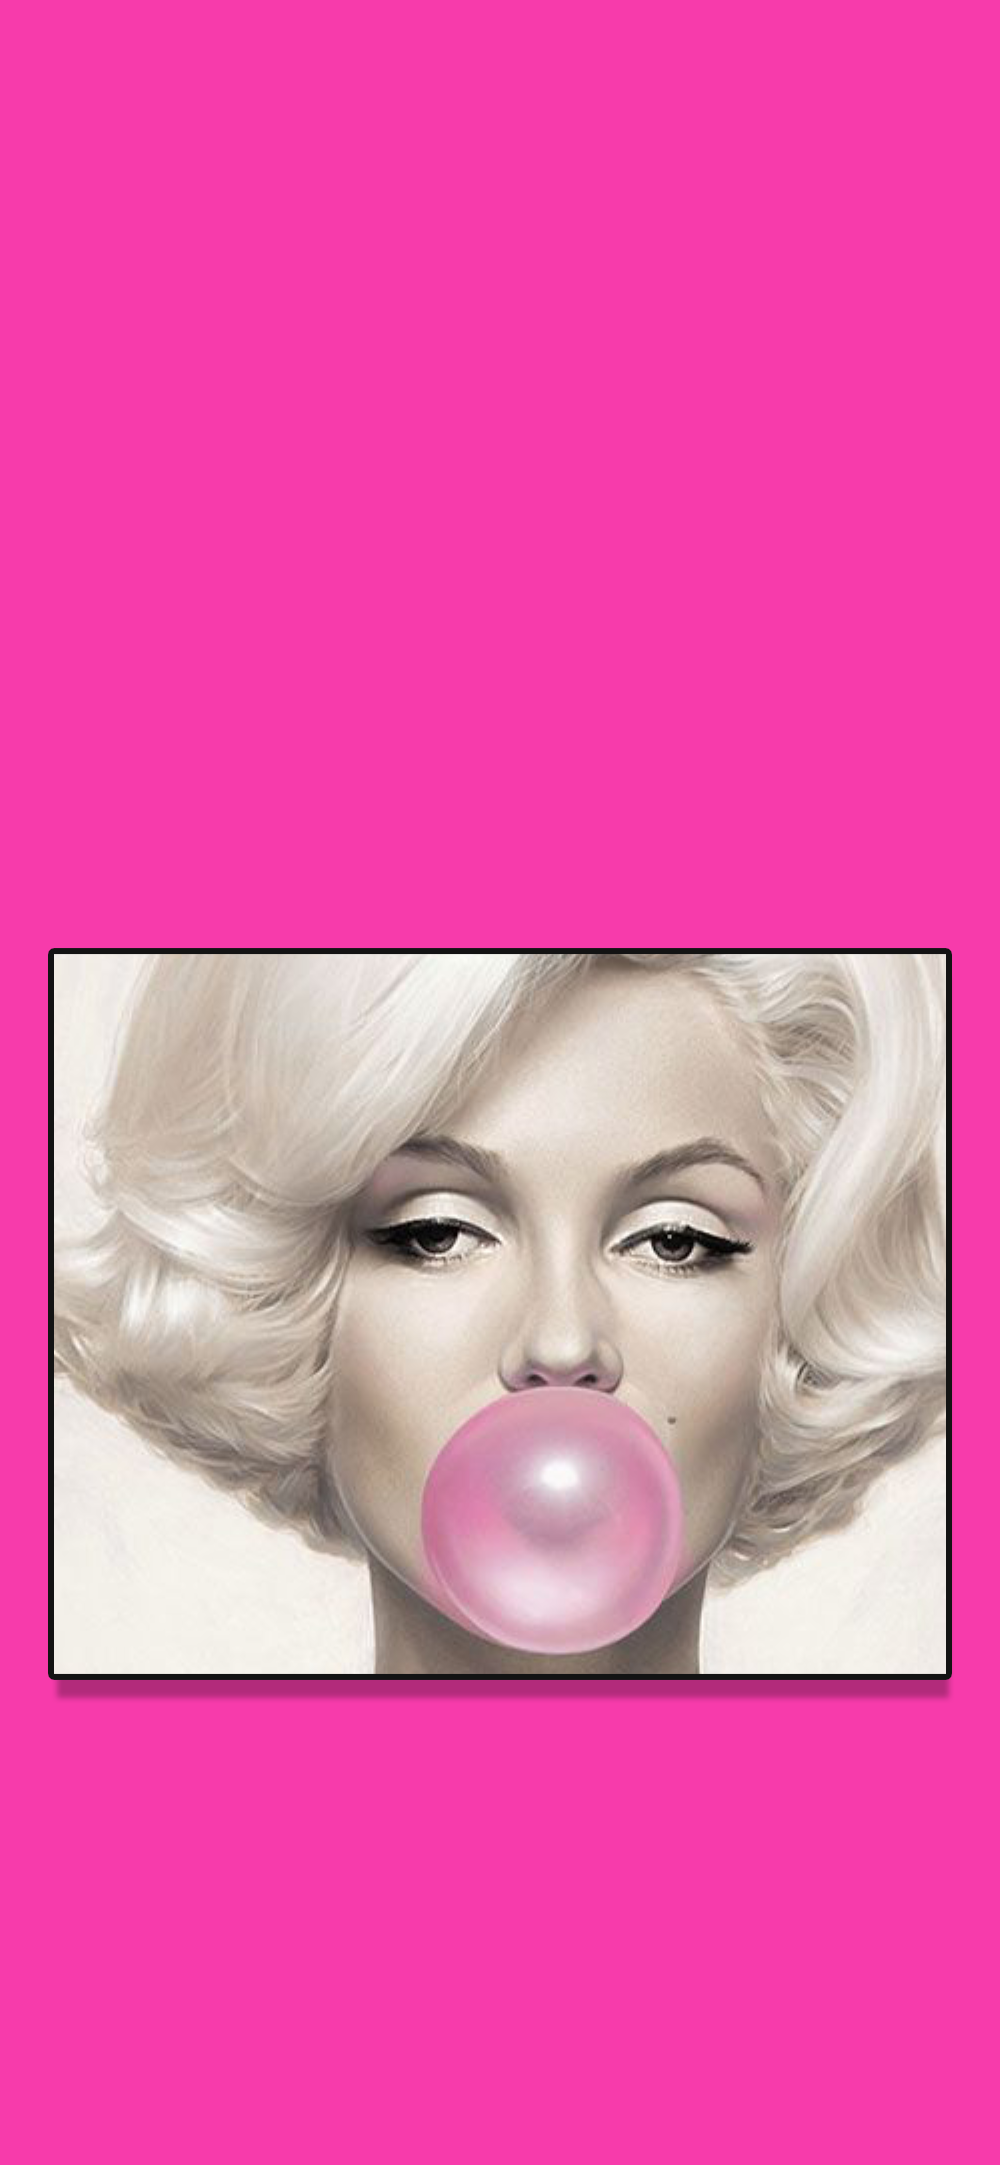 Wallpaper, Background, HD, iPhone, Android, Minimal, Marilyn Monroe, bubble gum, pink. Pink wallpaper iphone, Thank you wallpaper, Pink easter wallpaper